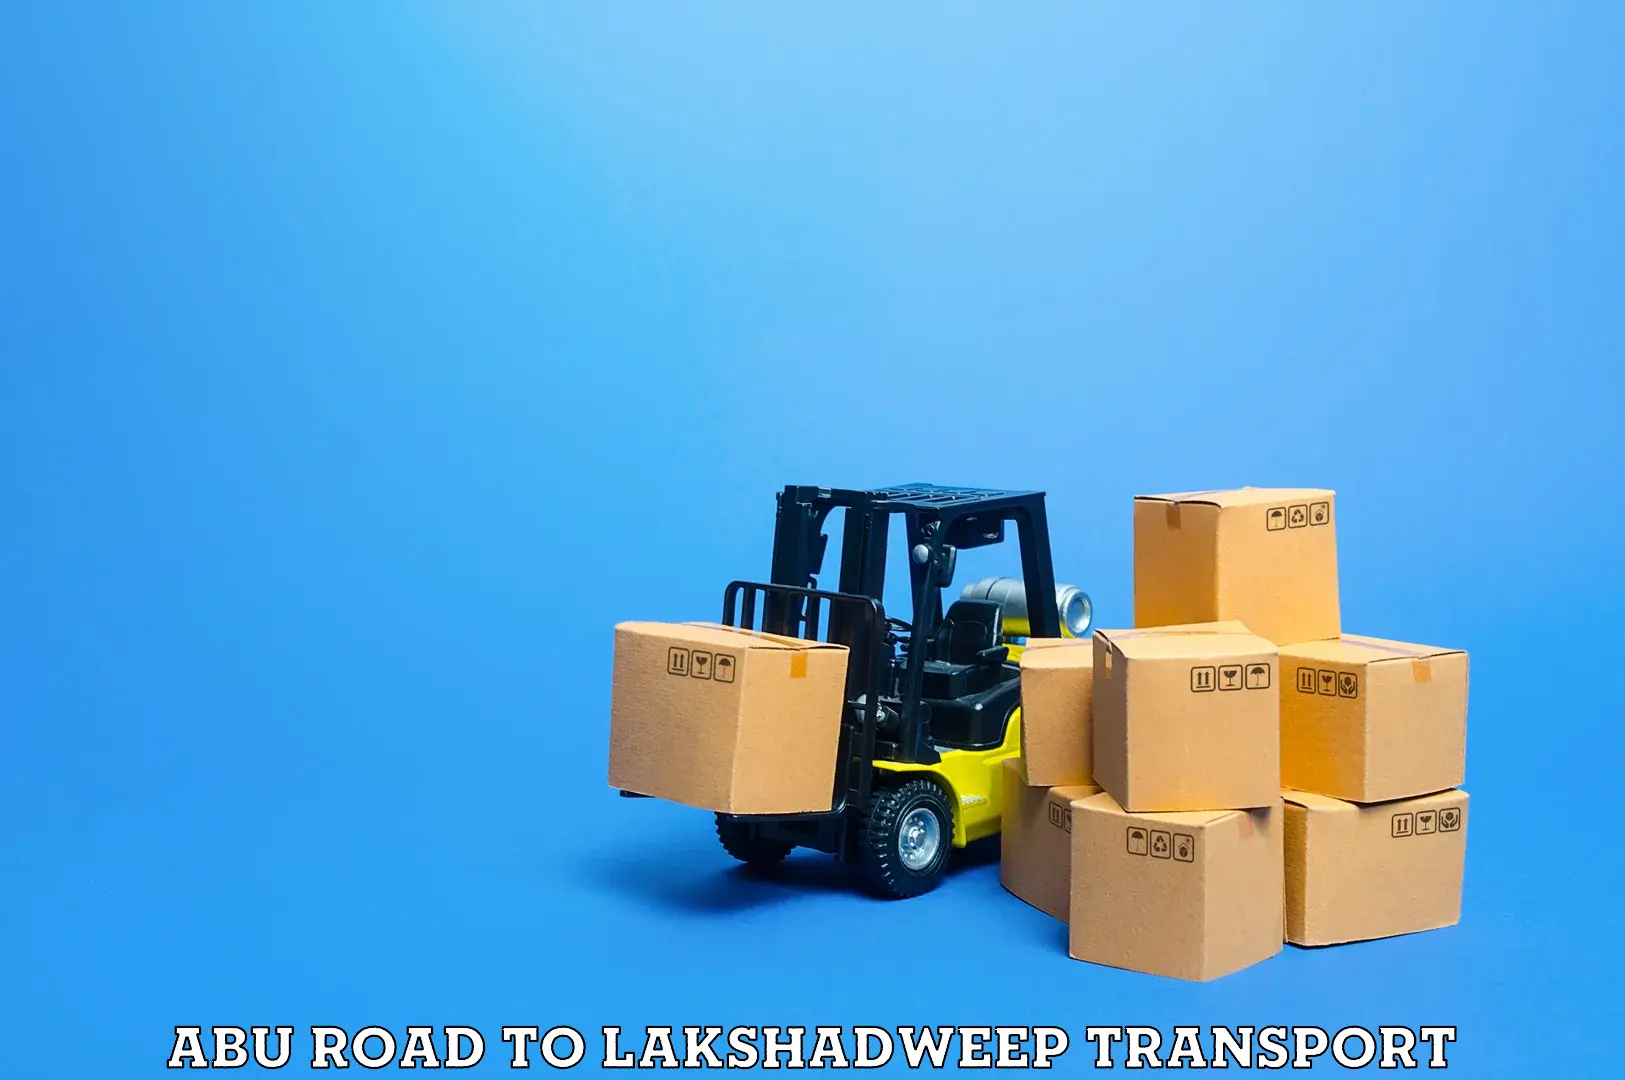 Daily parcel service transport Abu Road to Lakshadweep